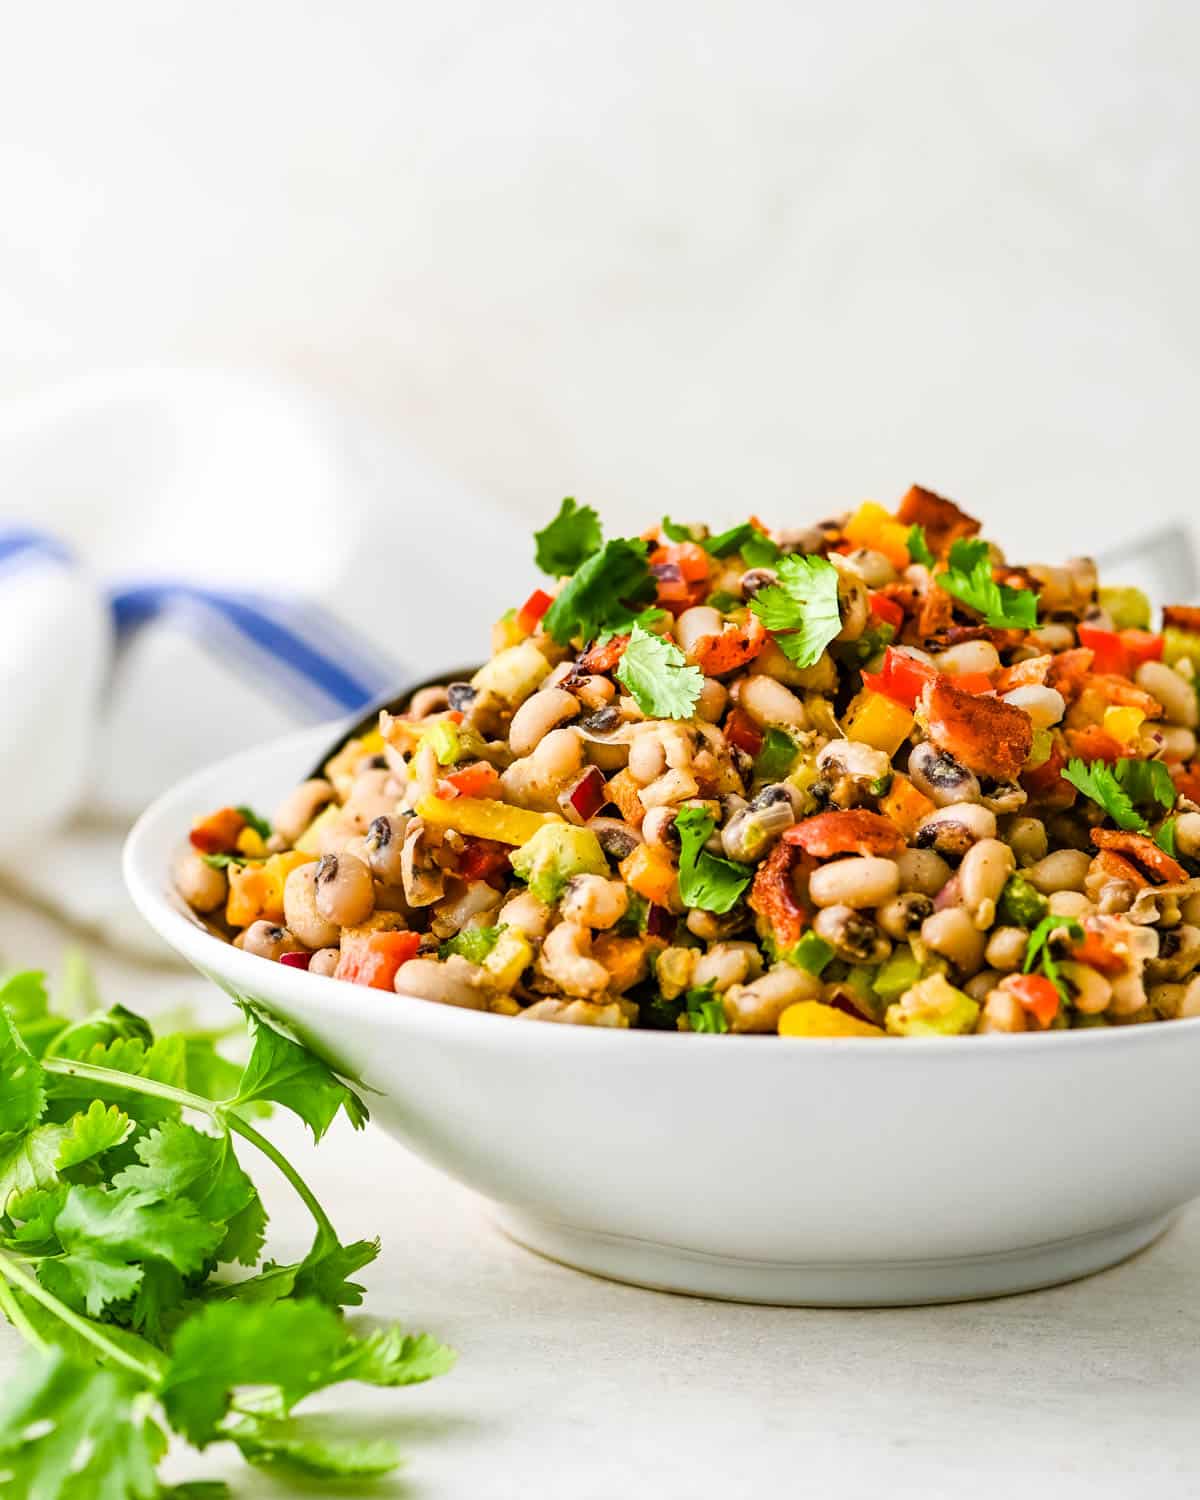 A bowl of the black-eyed pea salad.